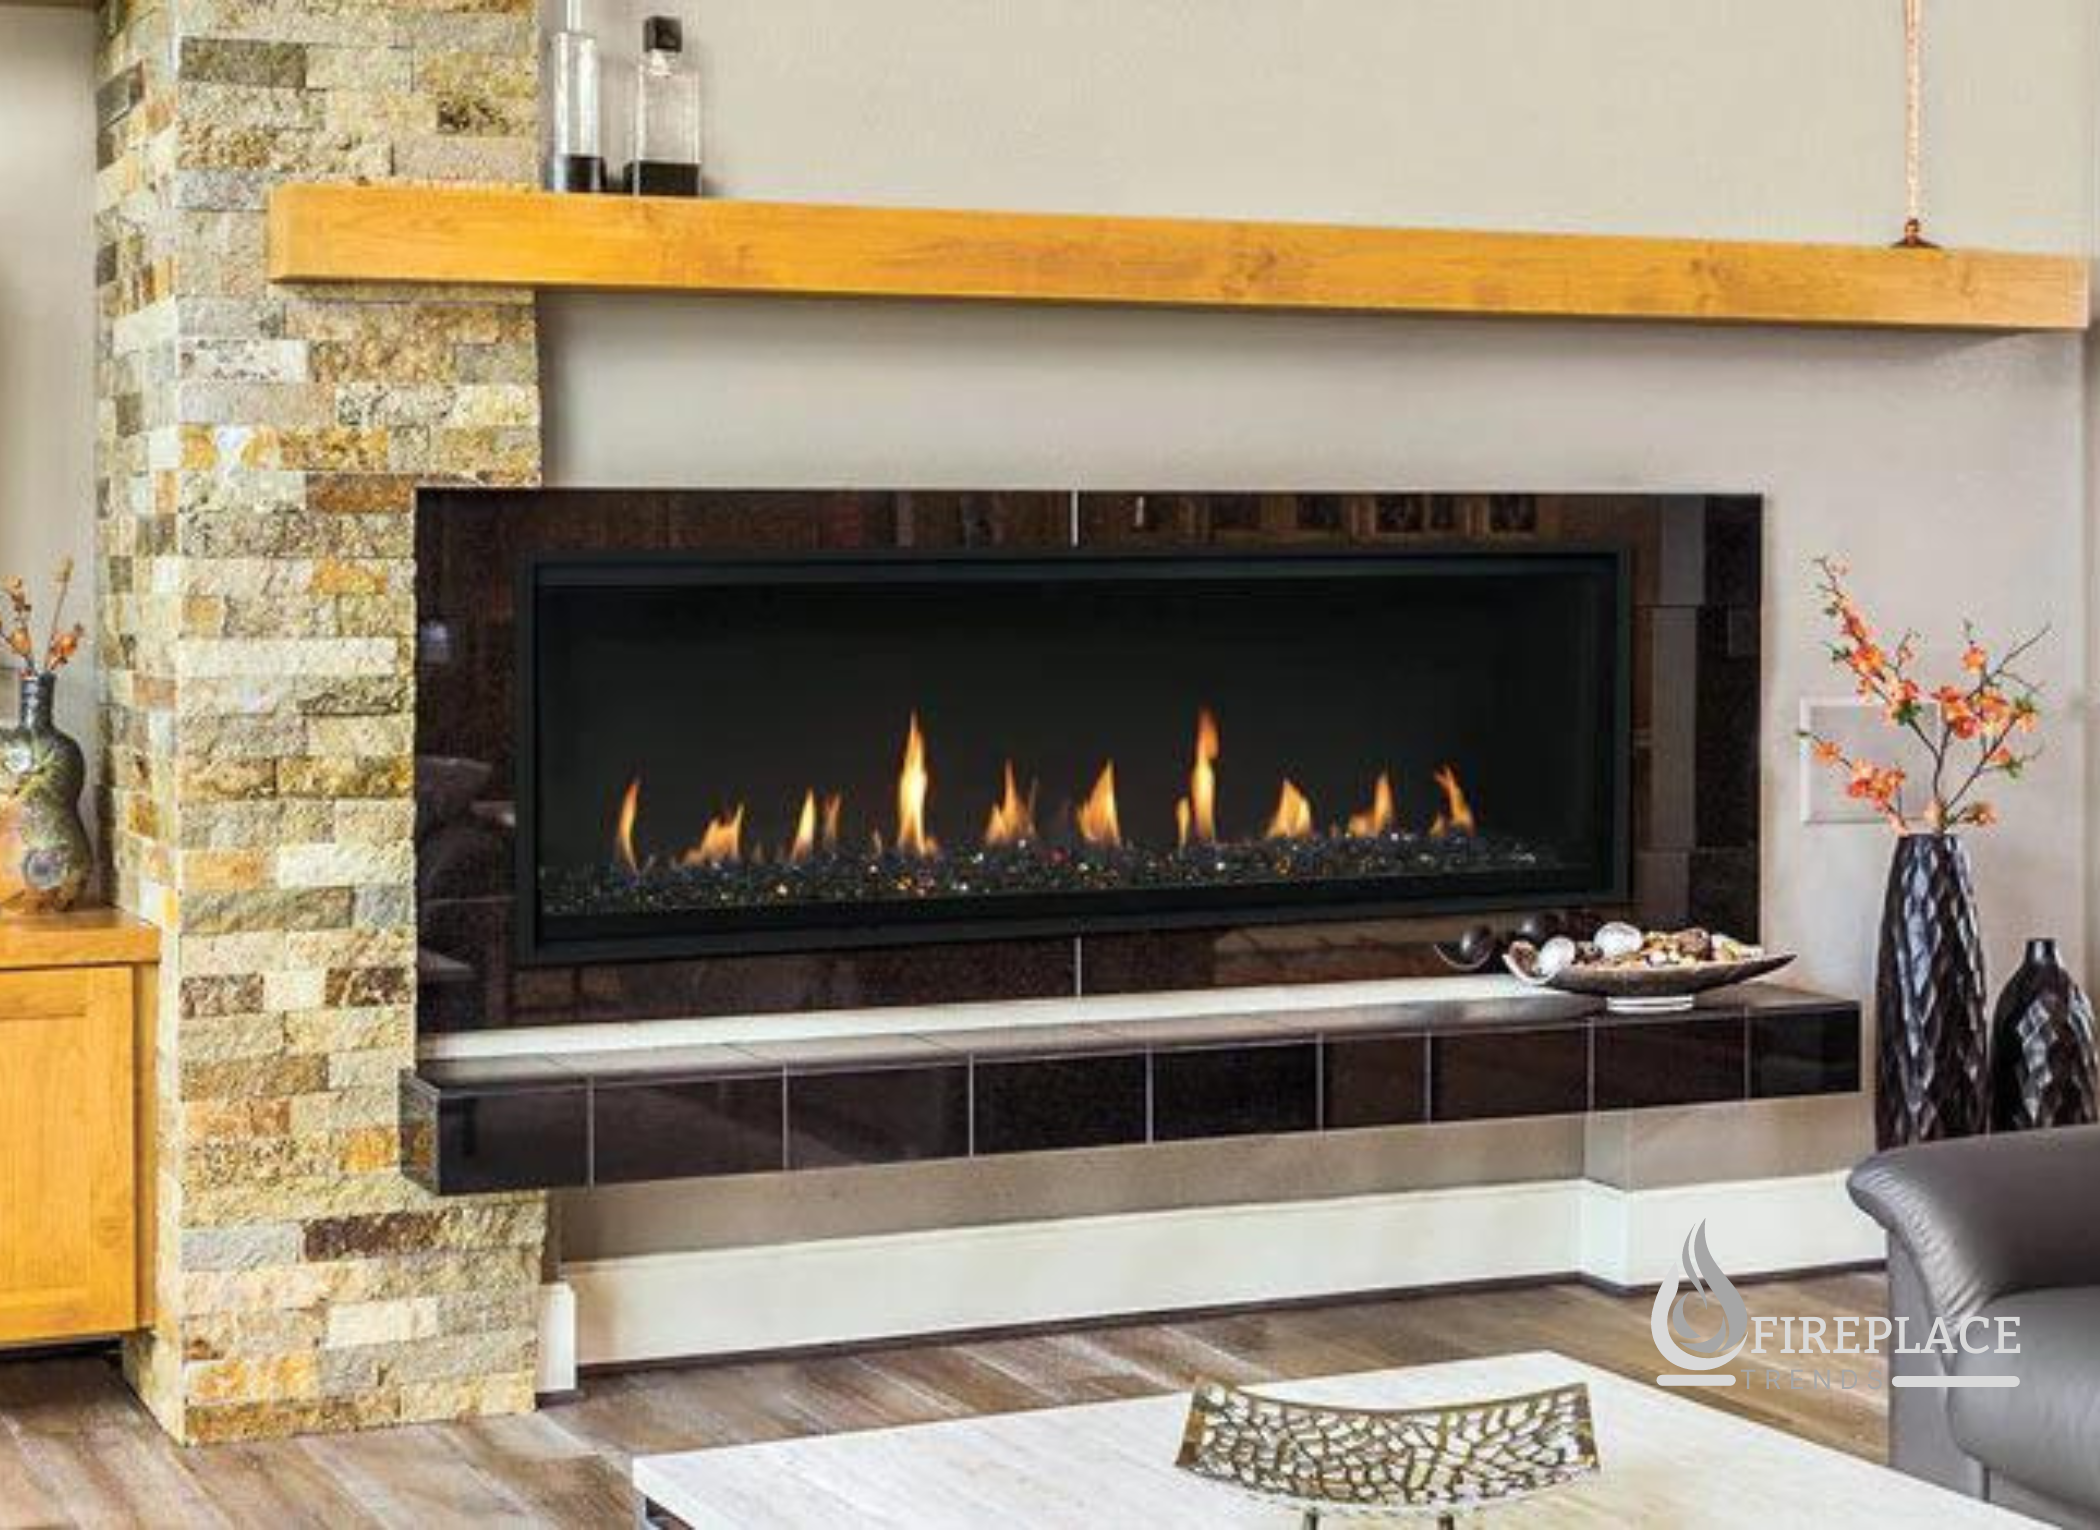 Superior - 60" - Electronic Ignition Direct Vent Linear Gas Fireplace - DRL 4000 Series